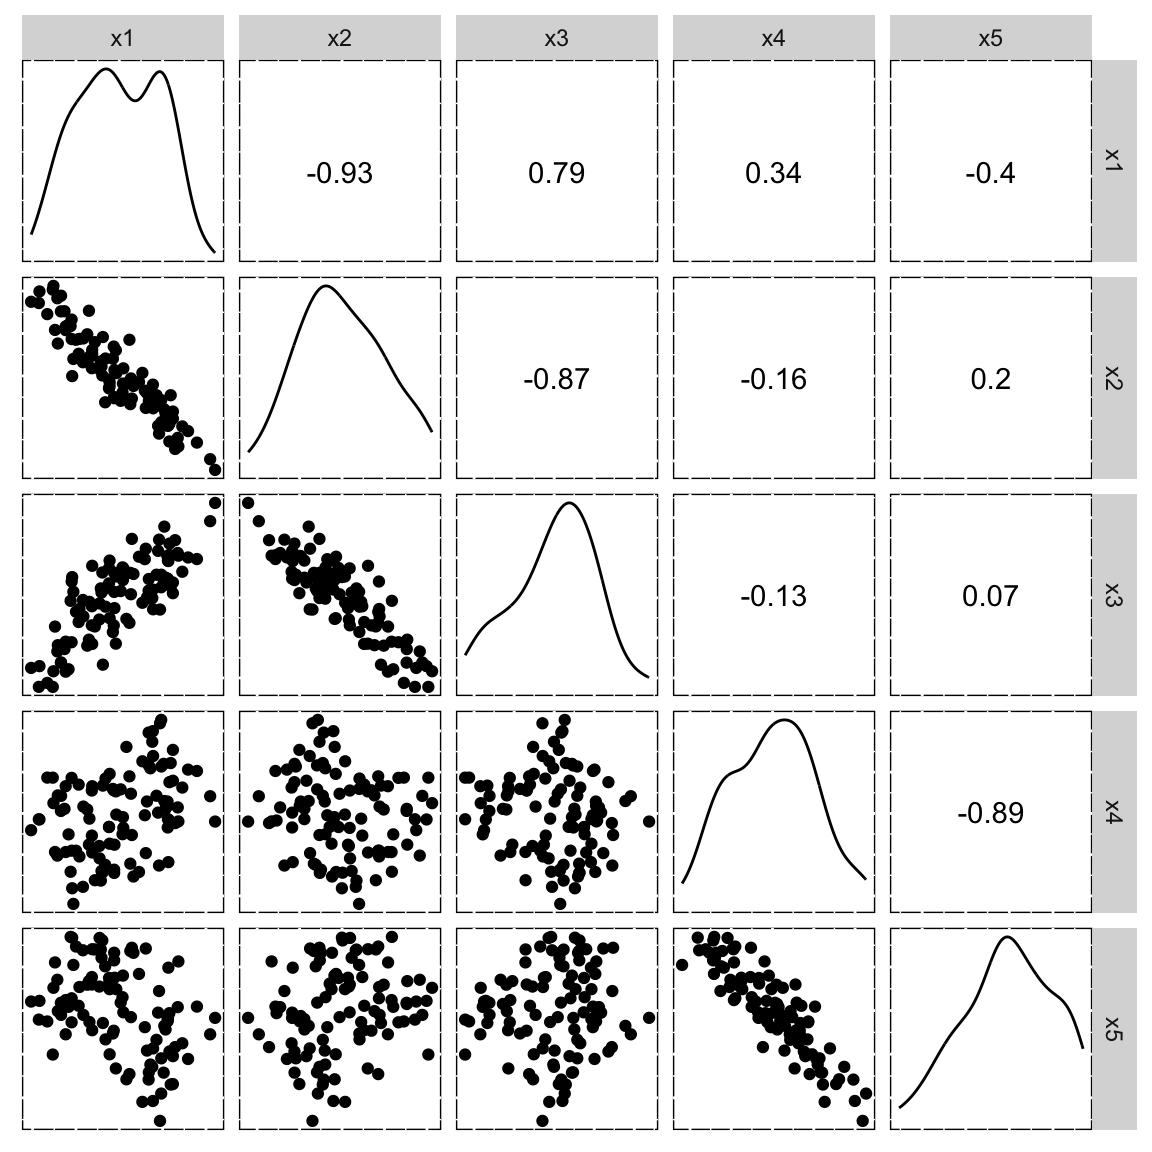 A five-by-five scatterplot matrix, with scatterplots in the lower triangle, correlaton printed in the upper triangle and density plots shown on the diagonal. Plots of x1 vs x2, x1 vs x3, x2 vs x3, and x4 vs x5 have strong positive or negative correlation. The remaining pairs of variables have no association.